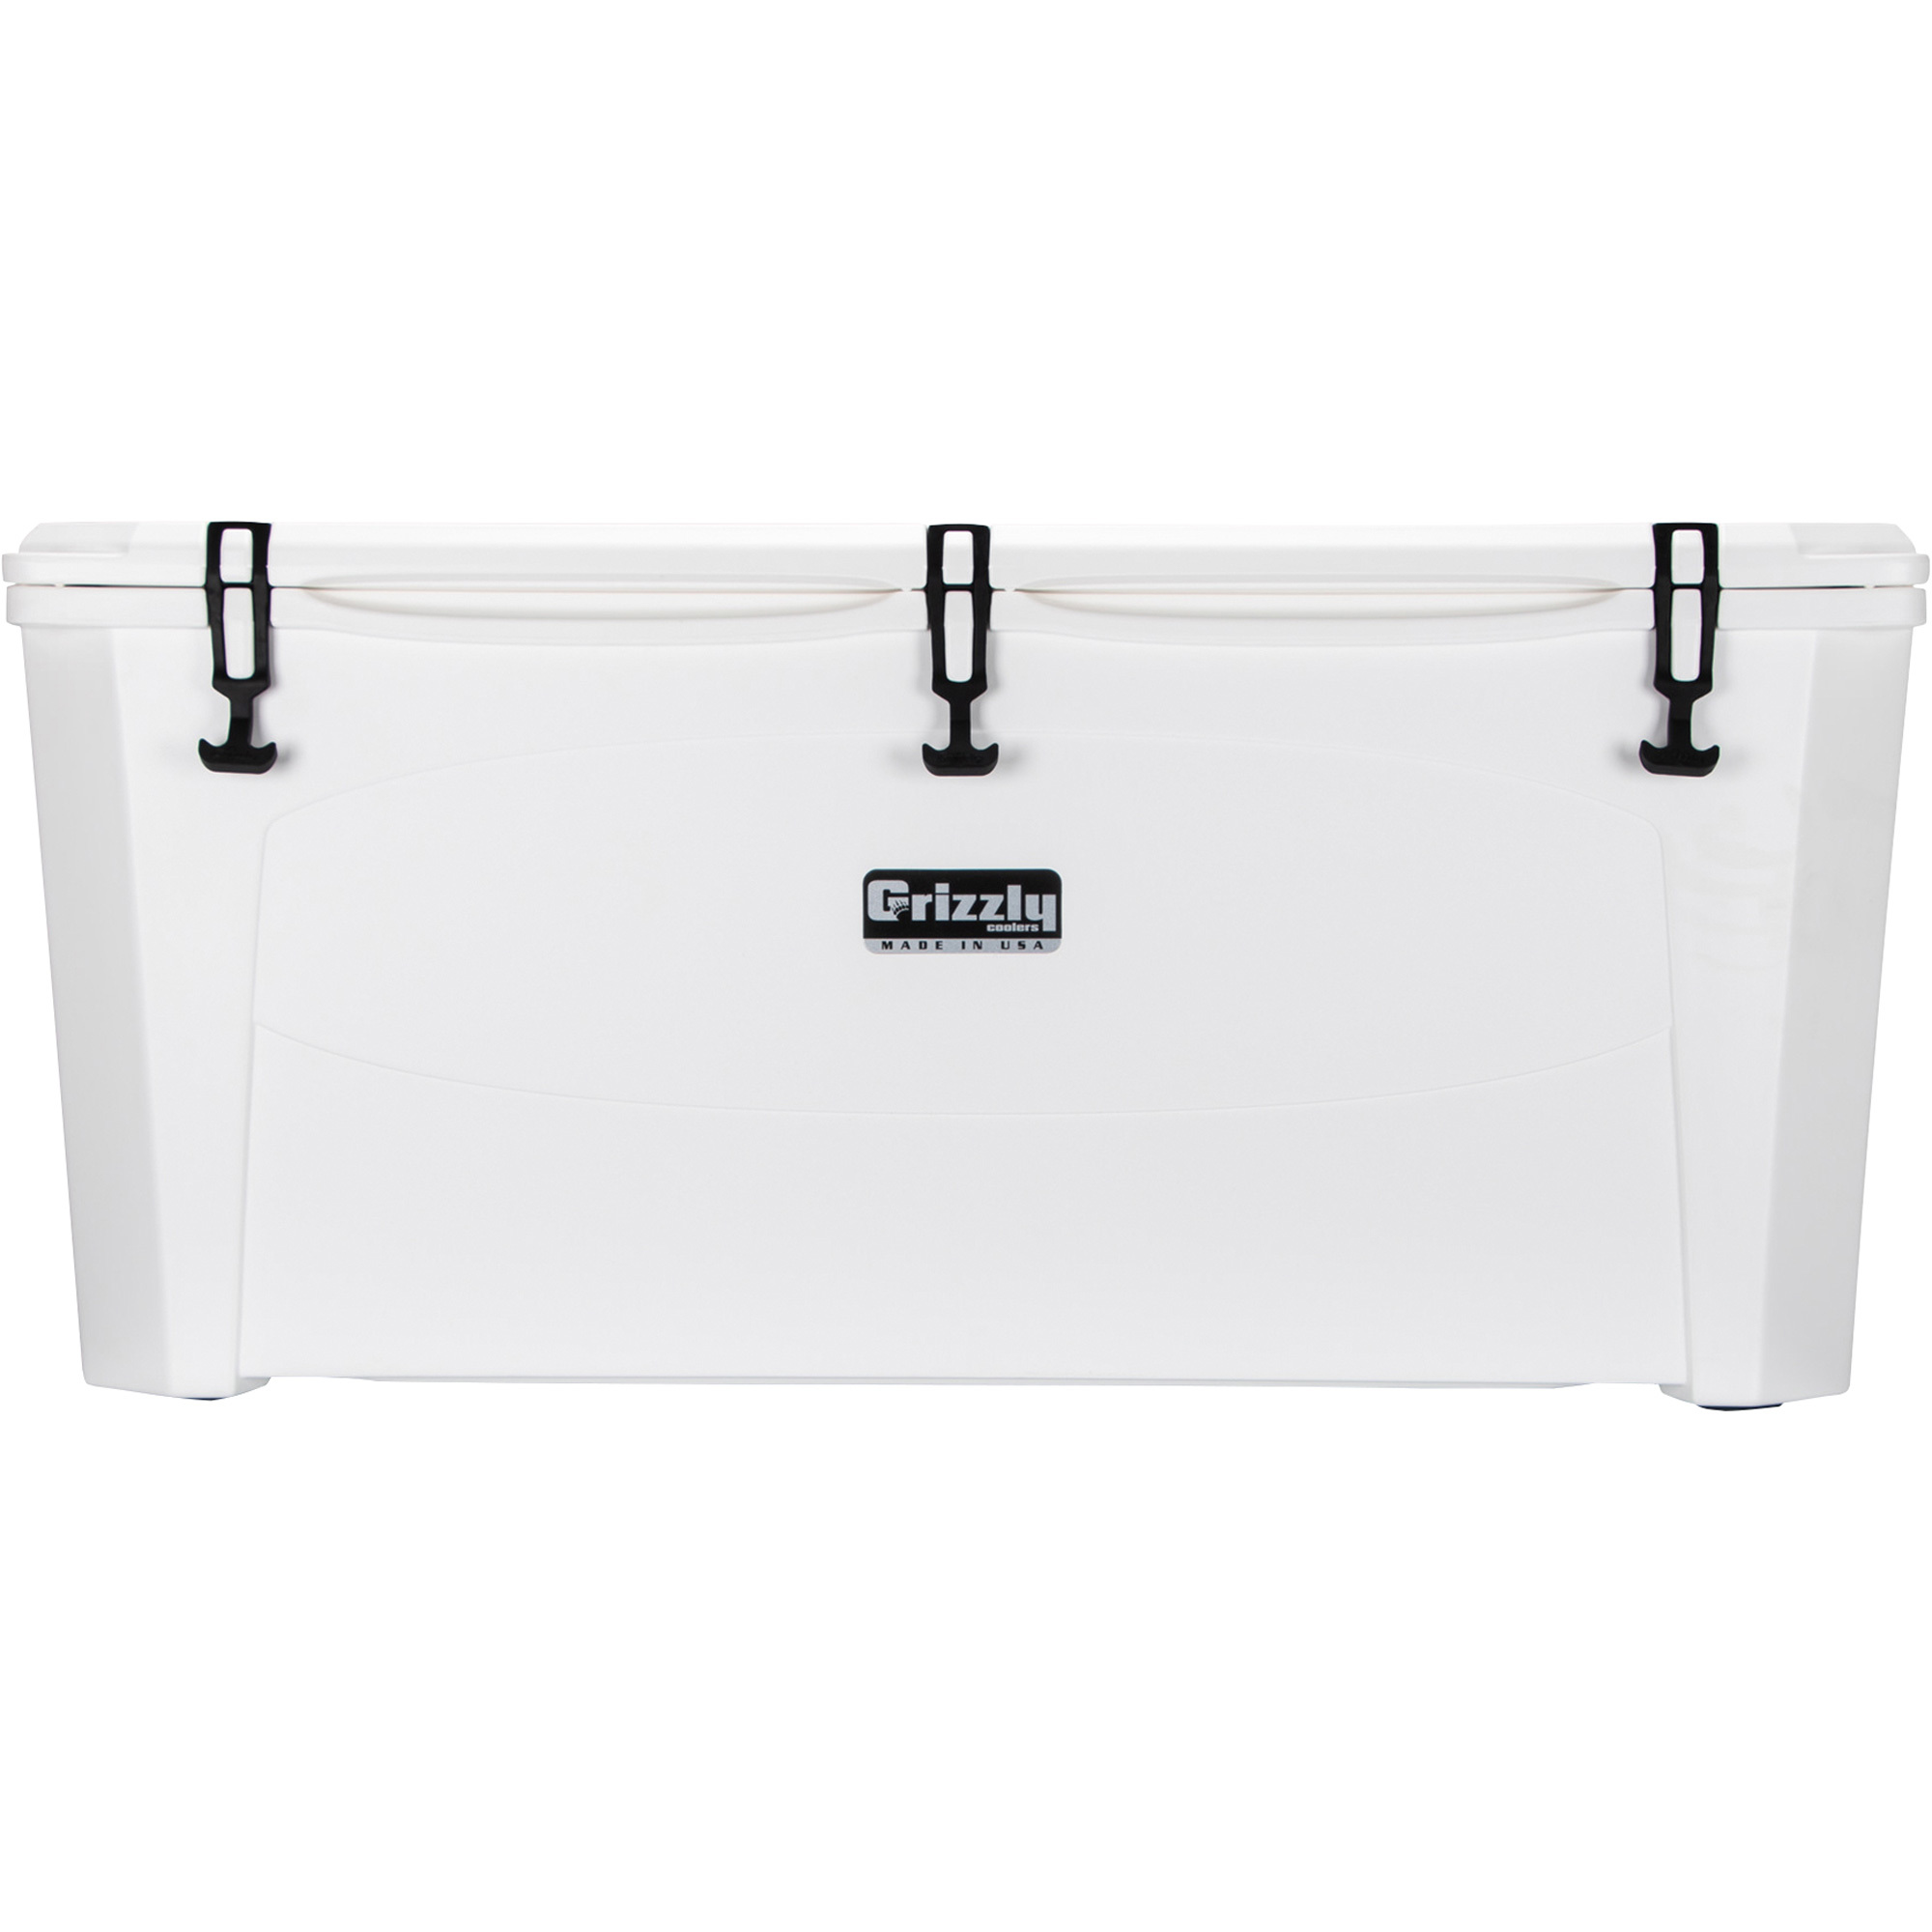 Grizzly Cooler 165-qt. White, Model G165